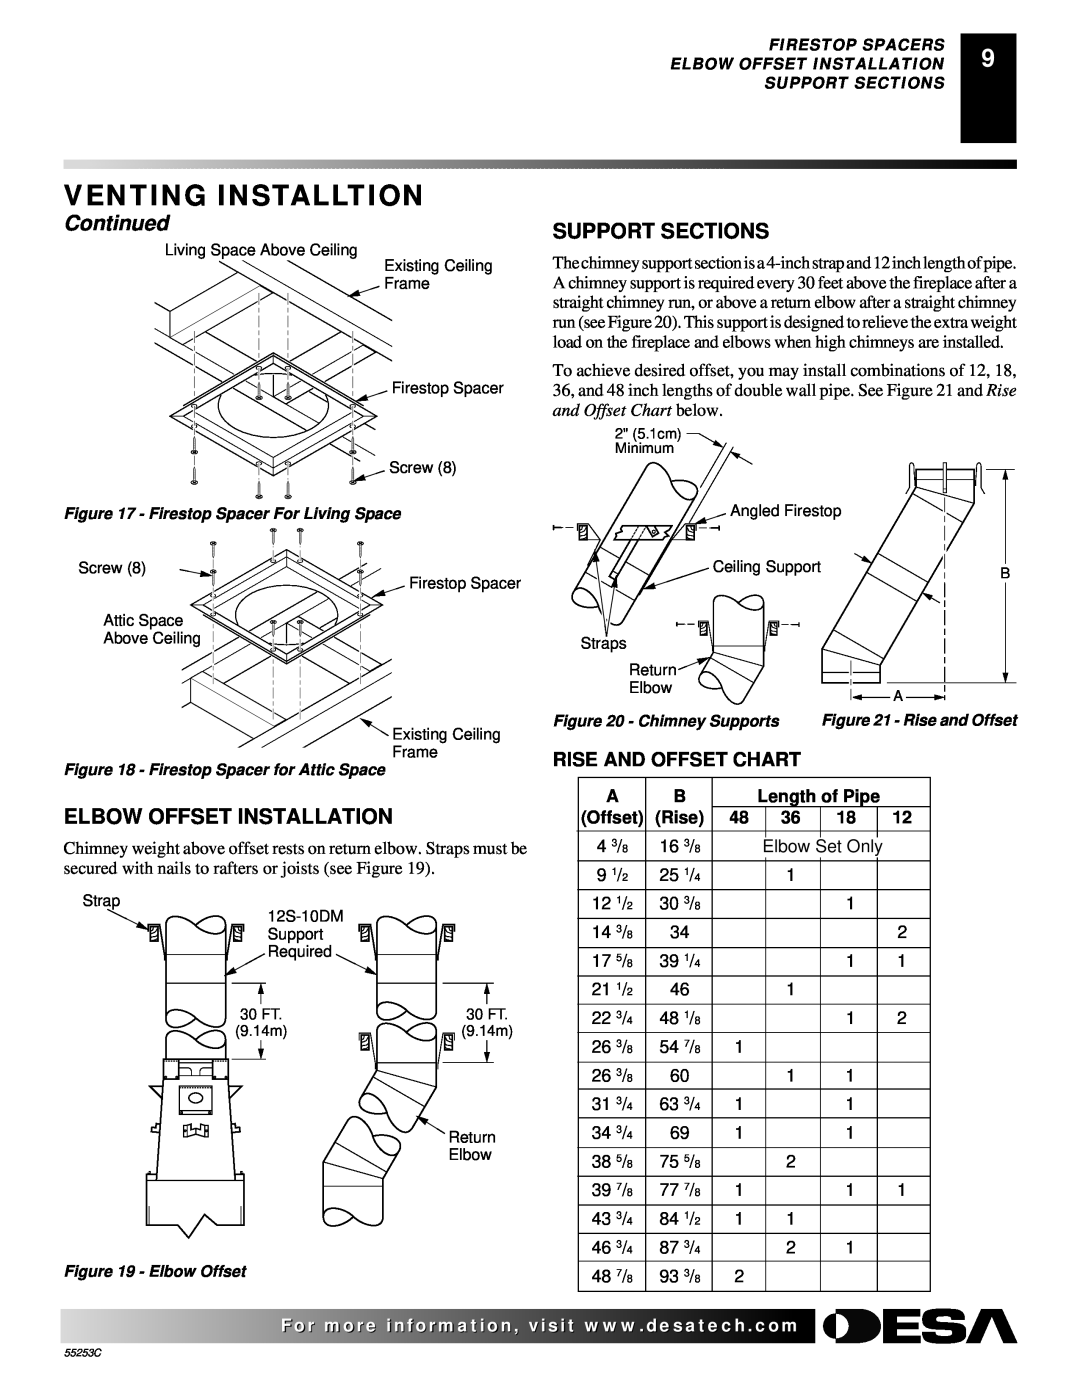 Desa V3610ST manual Venting Installtion, Continued, Support Sections, Elbow Offset Installation, Rise And Offset Chart 